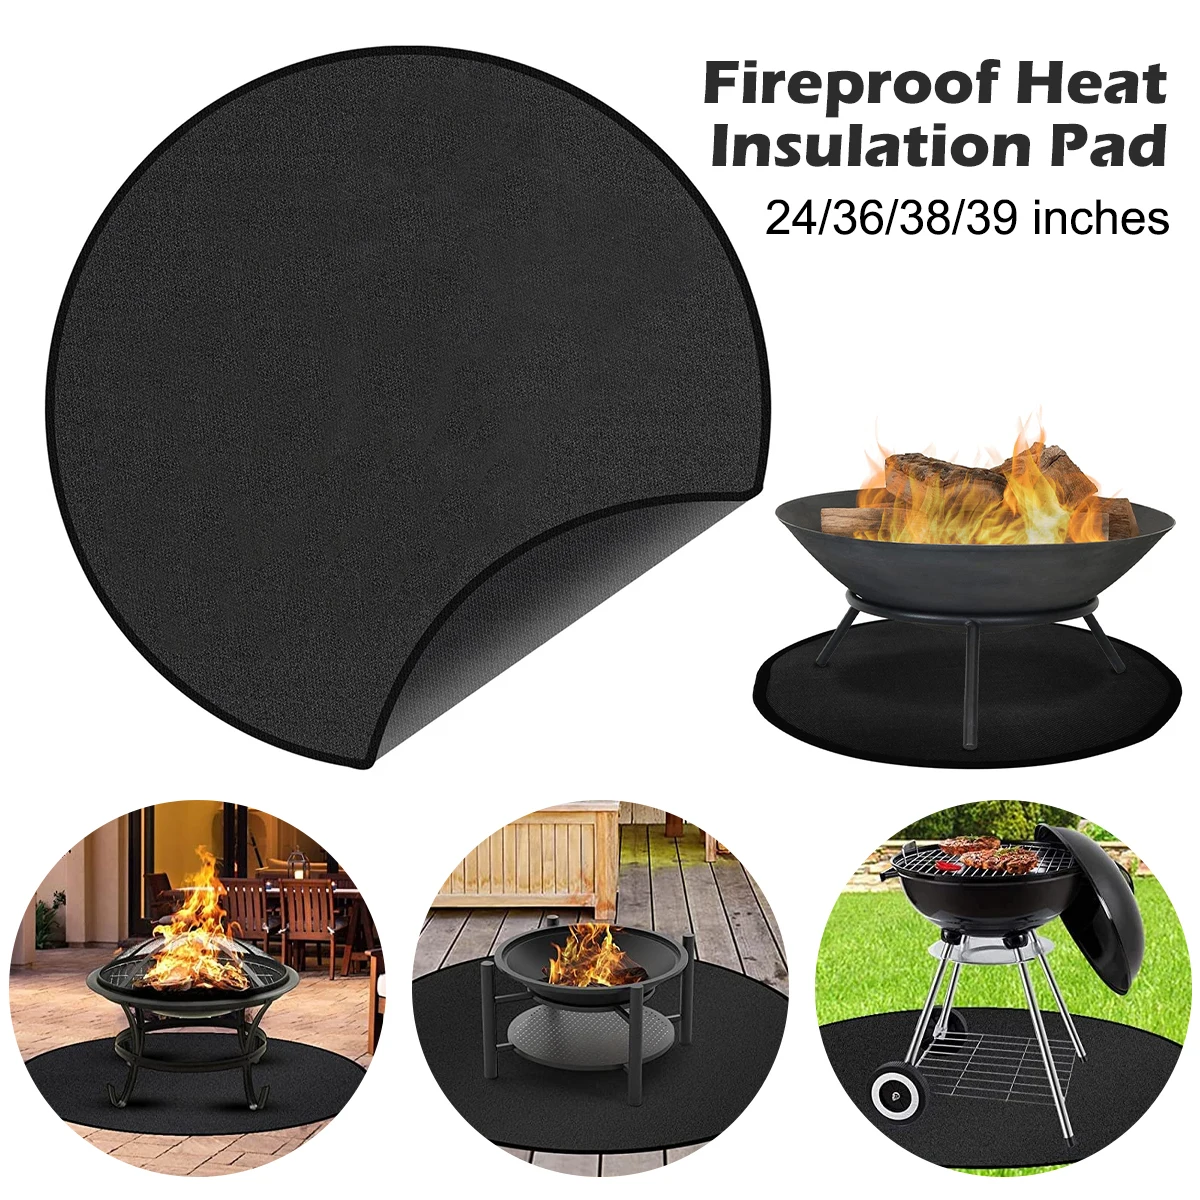 

24" 36" 38" 39" Fireproof Fire Pit Mat Fireplace Brazier Fiberglass Silicone Oven Pad Outdoor Terrace Barbecue BBQ Blanket